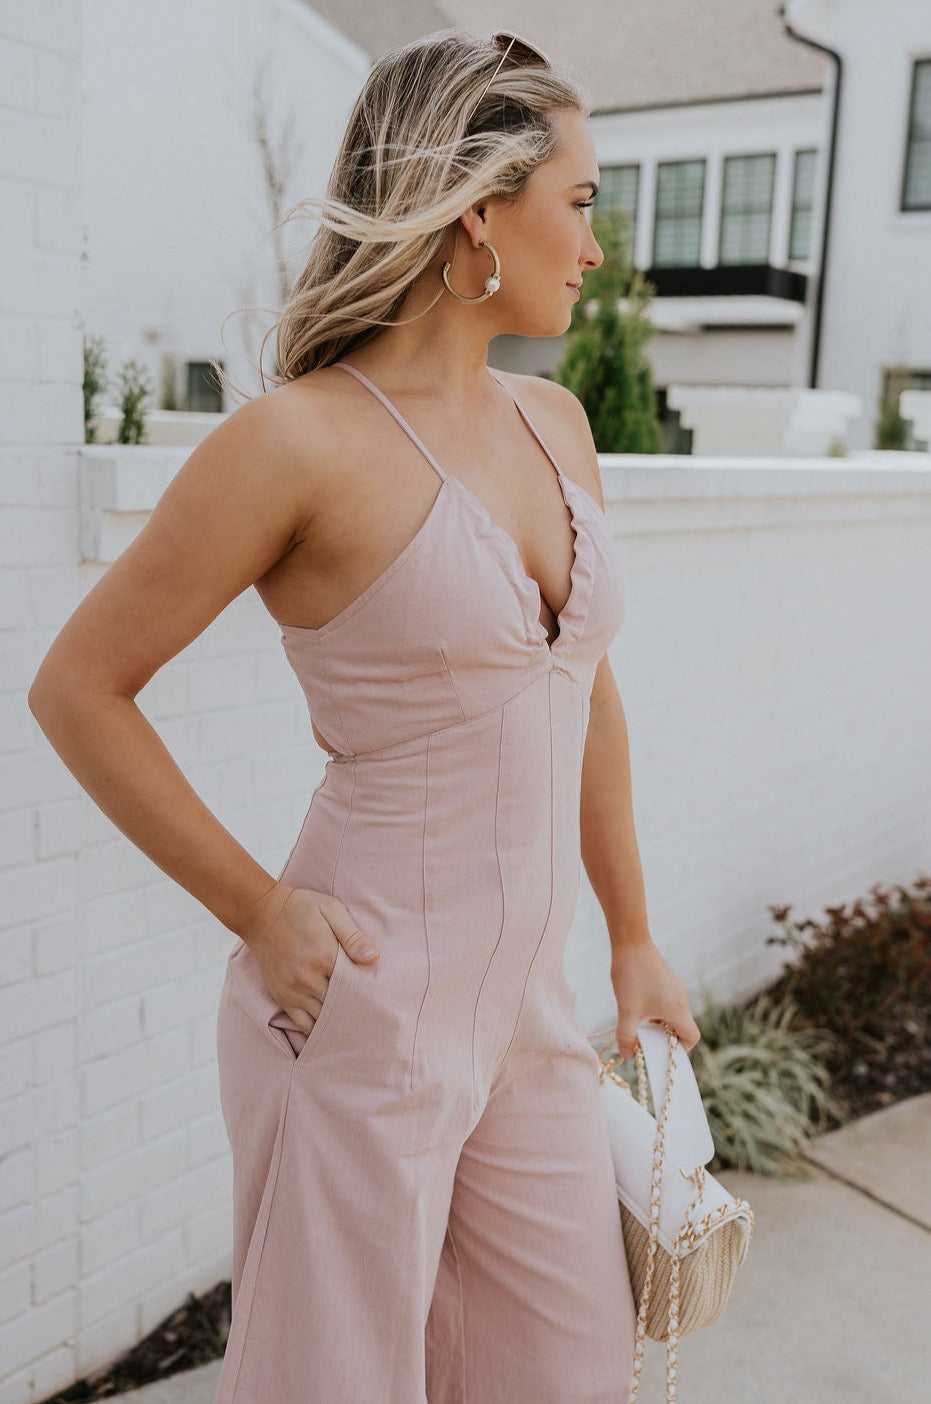 Side view of female model wearing the Aleah Mauve Pink Sleeveless Jumpsuit which features Mauve Pink Lightweight Fabric, Wide Leg Pants, Upper Ruched Detail, Two Side Pockets, Scooped Neckline, Adjustable Straps and Open Back with Tie Closure and Zipper